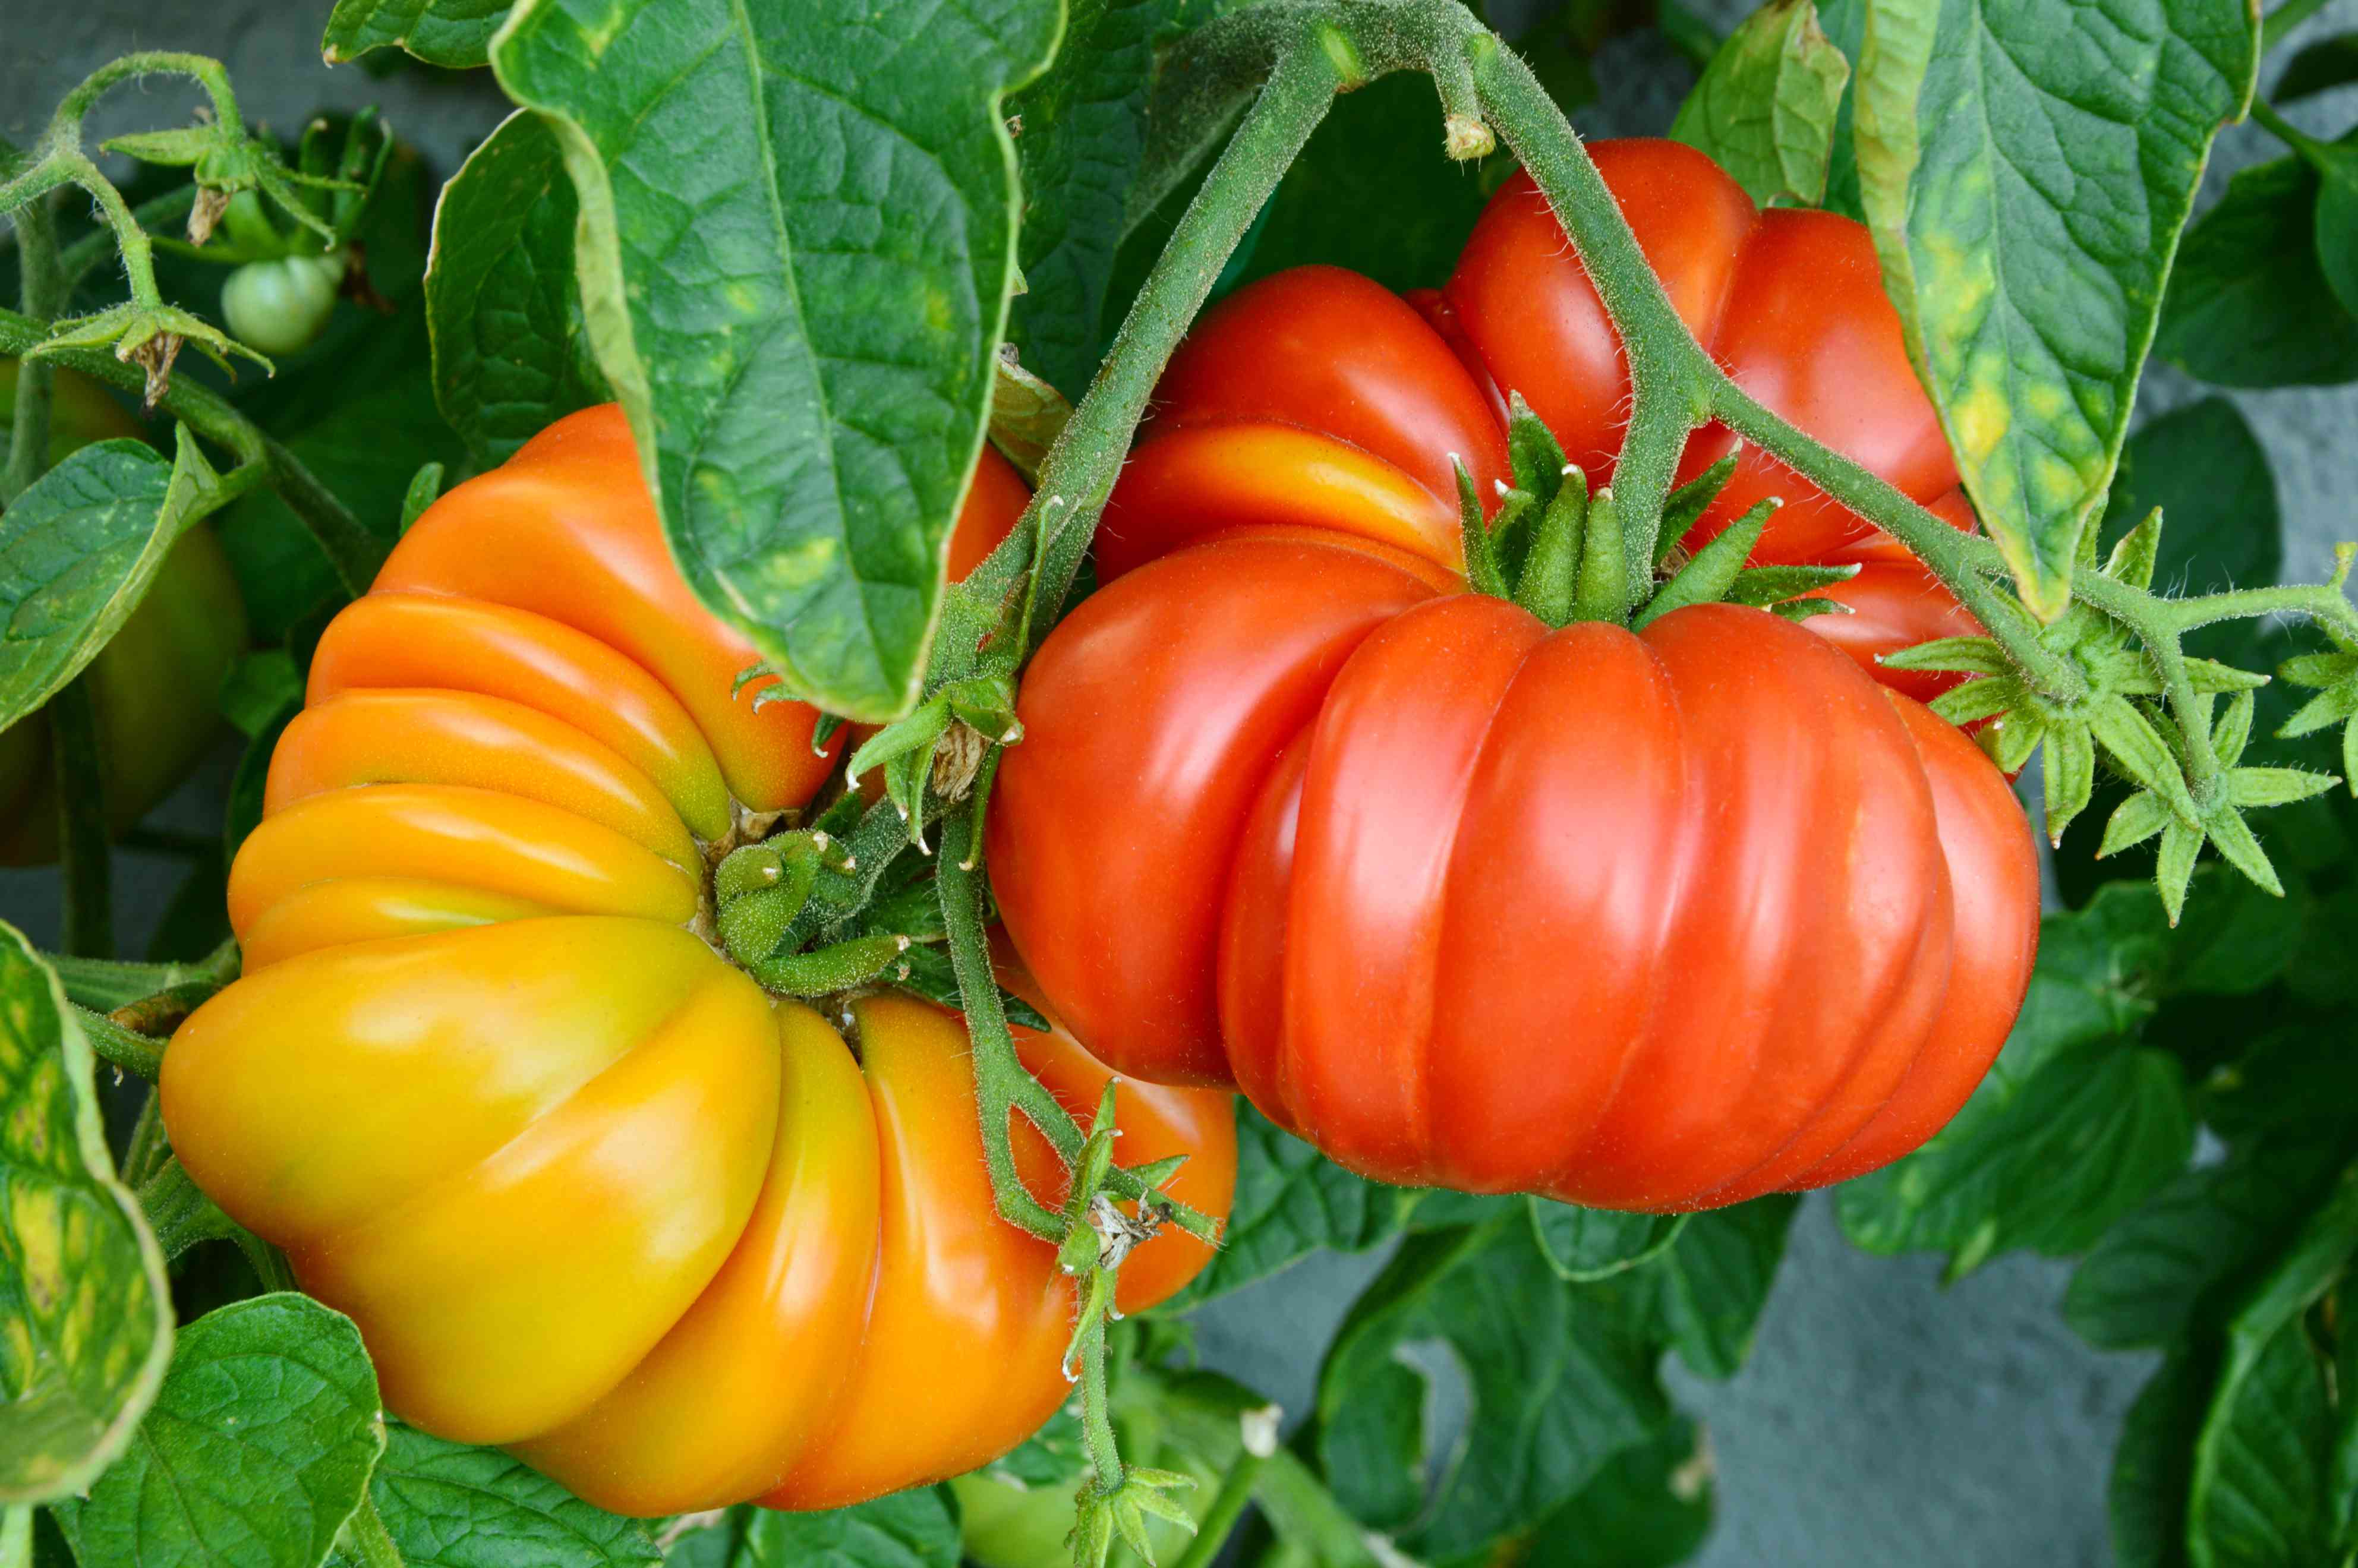 grow the most productive beefsteak tomato plants with these 9 tips